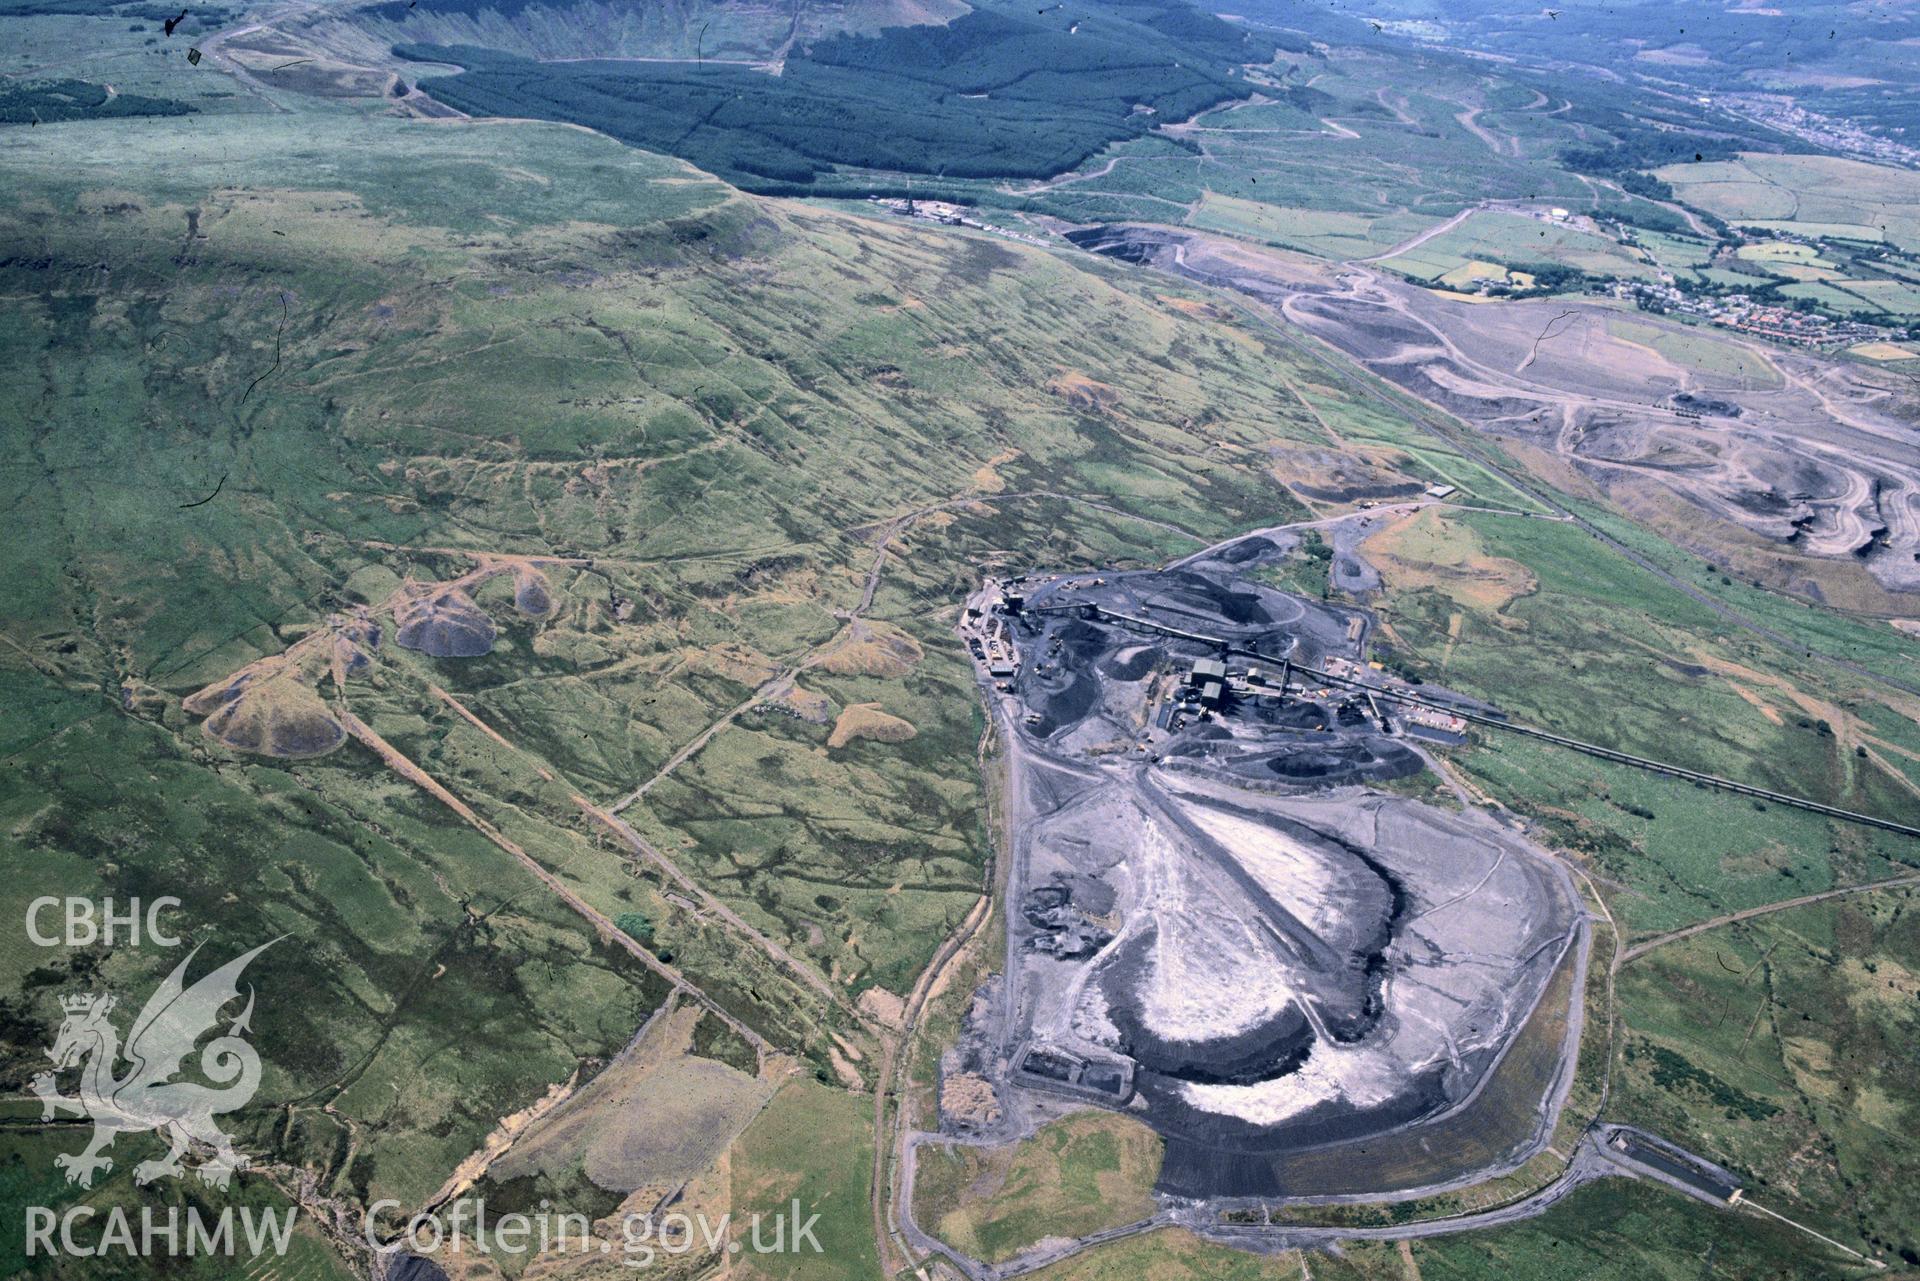 Slide of RCAHMW colour oblique aerial photograph of Tower Drift Mine, Hirwaun, taken by C.R. Musson, 6/7/1992.